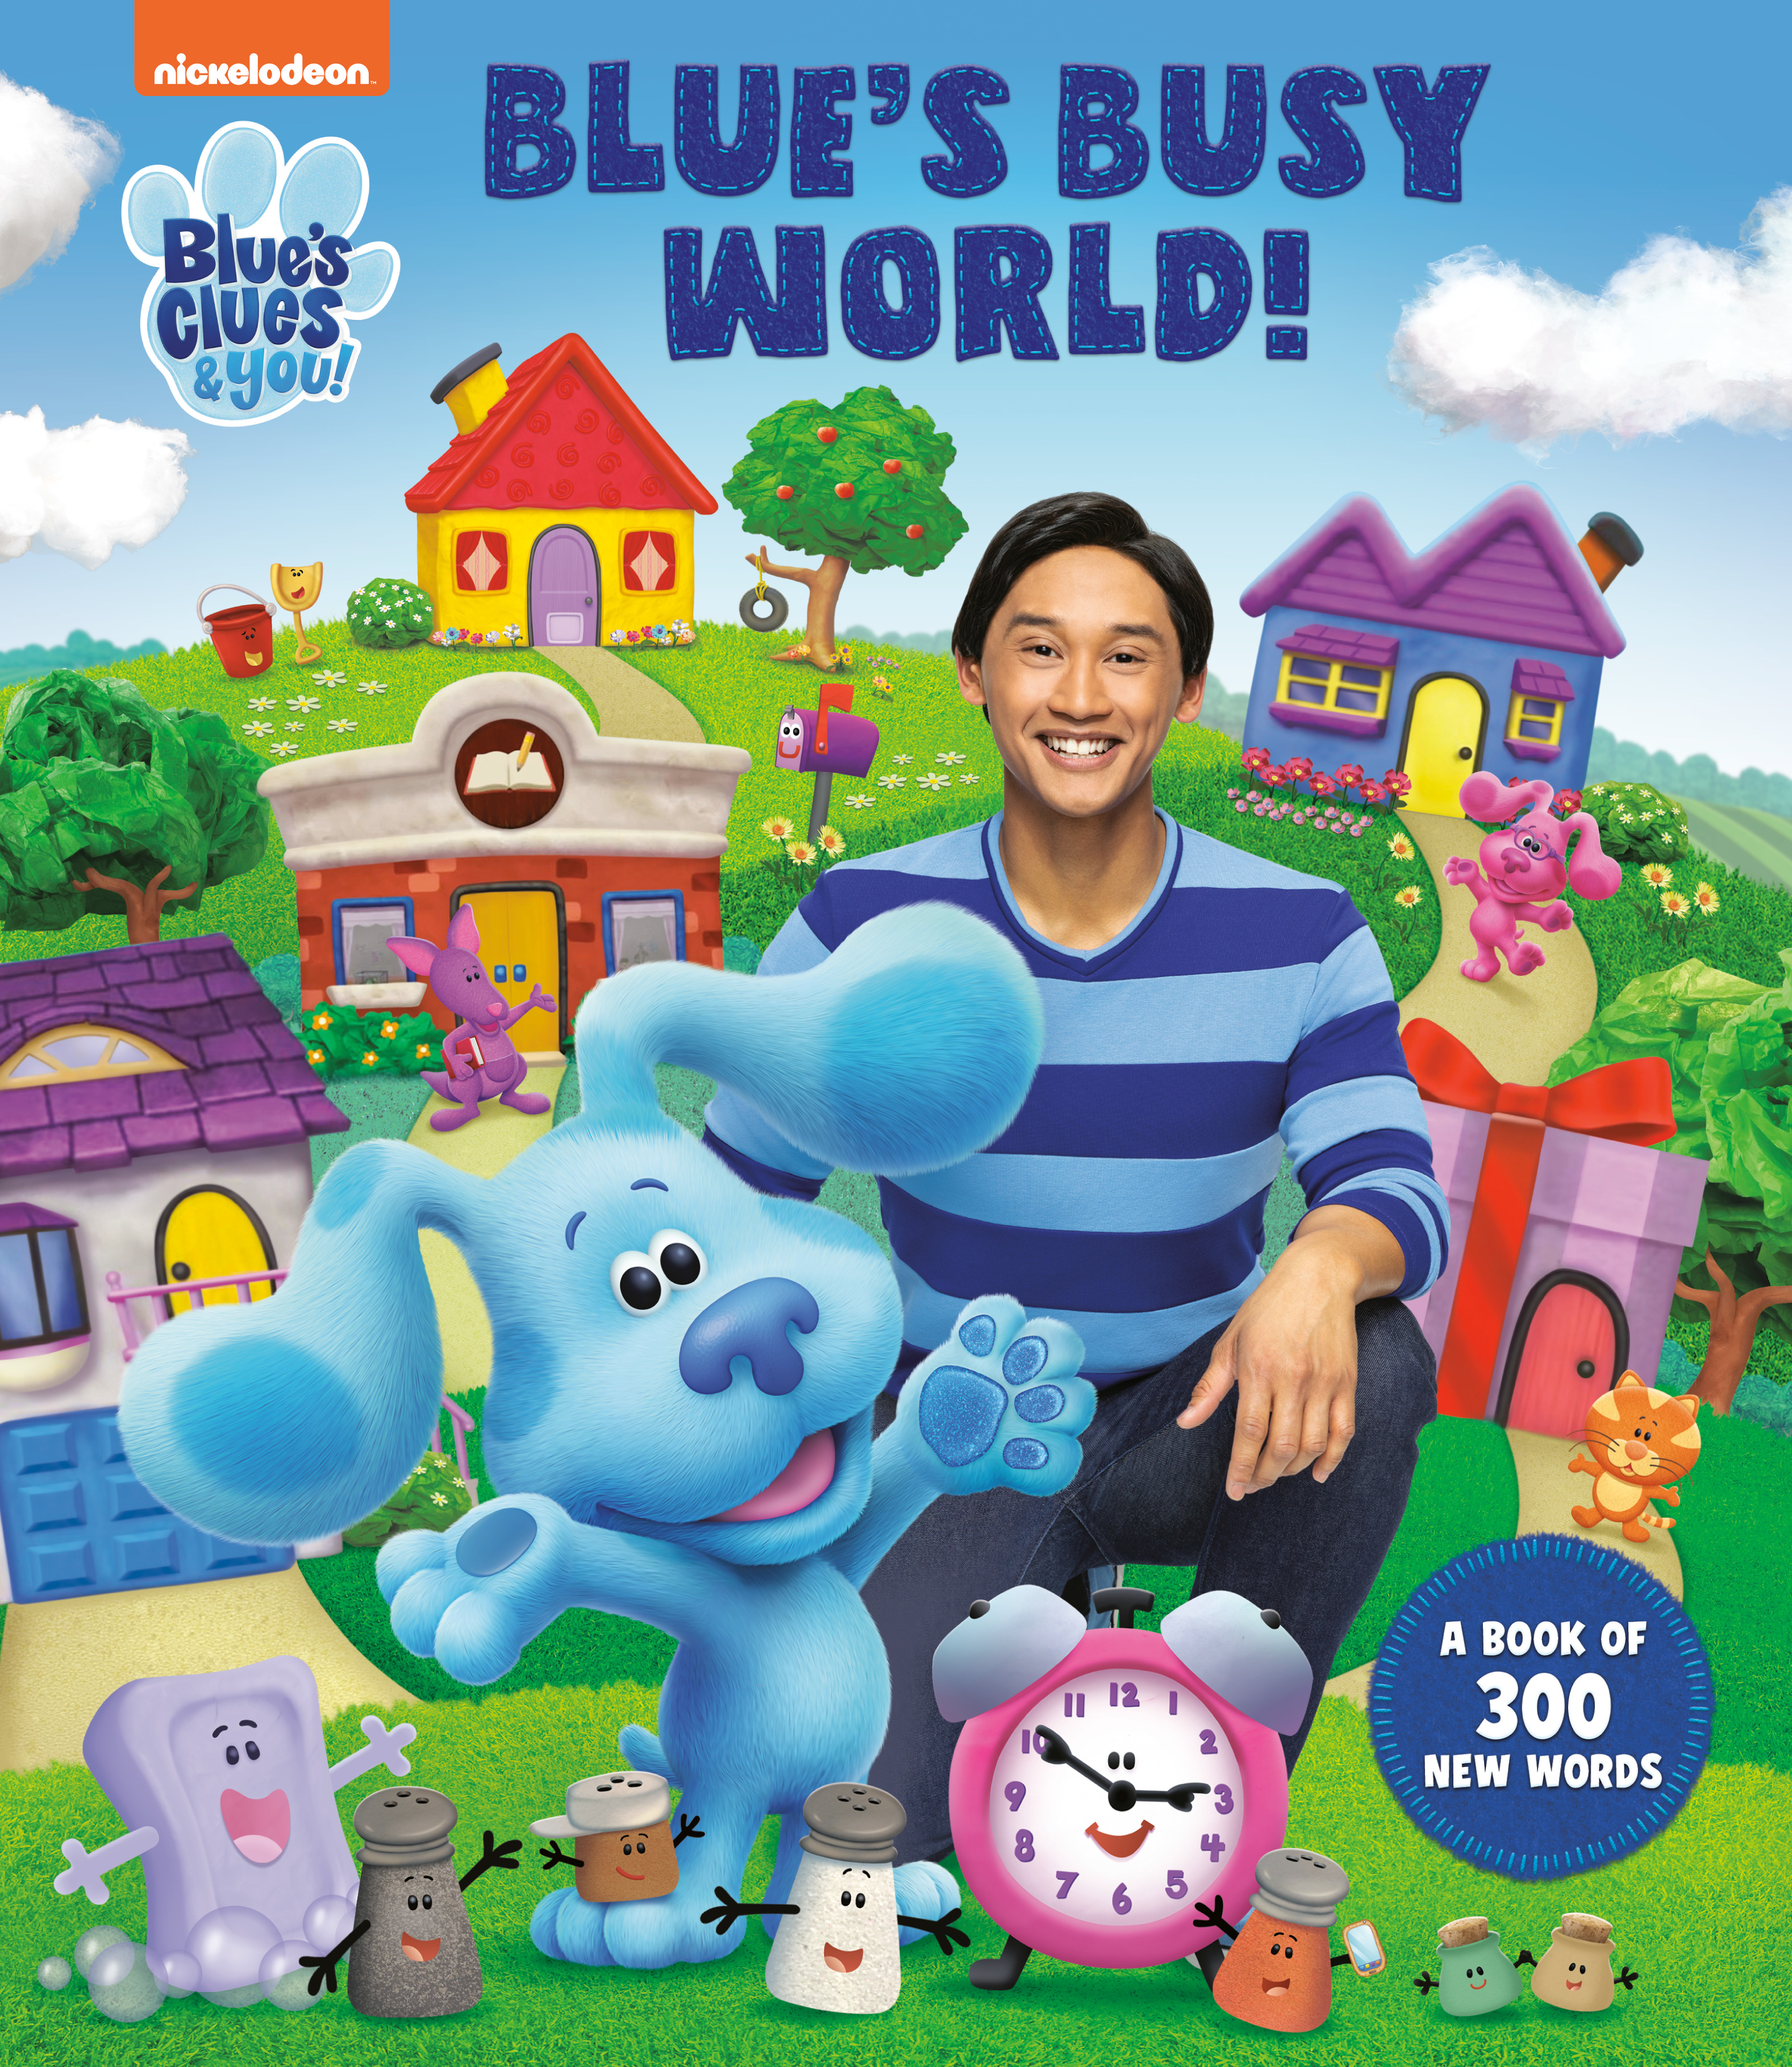 Blue's Busy World! A Book of 300 New Words (Blue's Clues &amp; You) | First reader